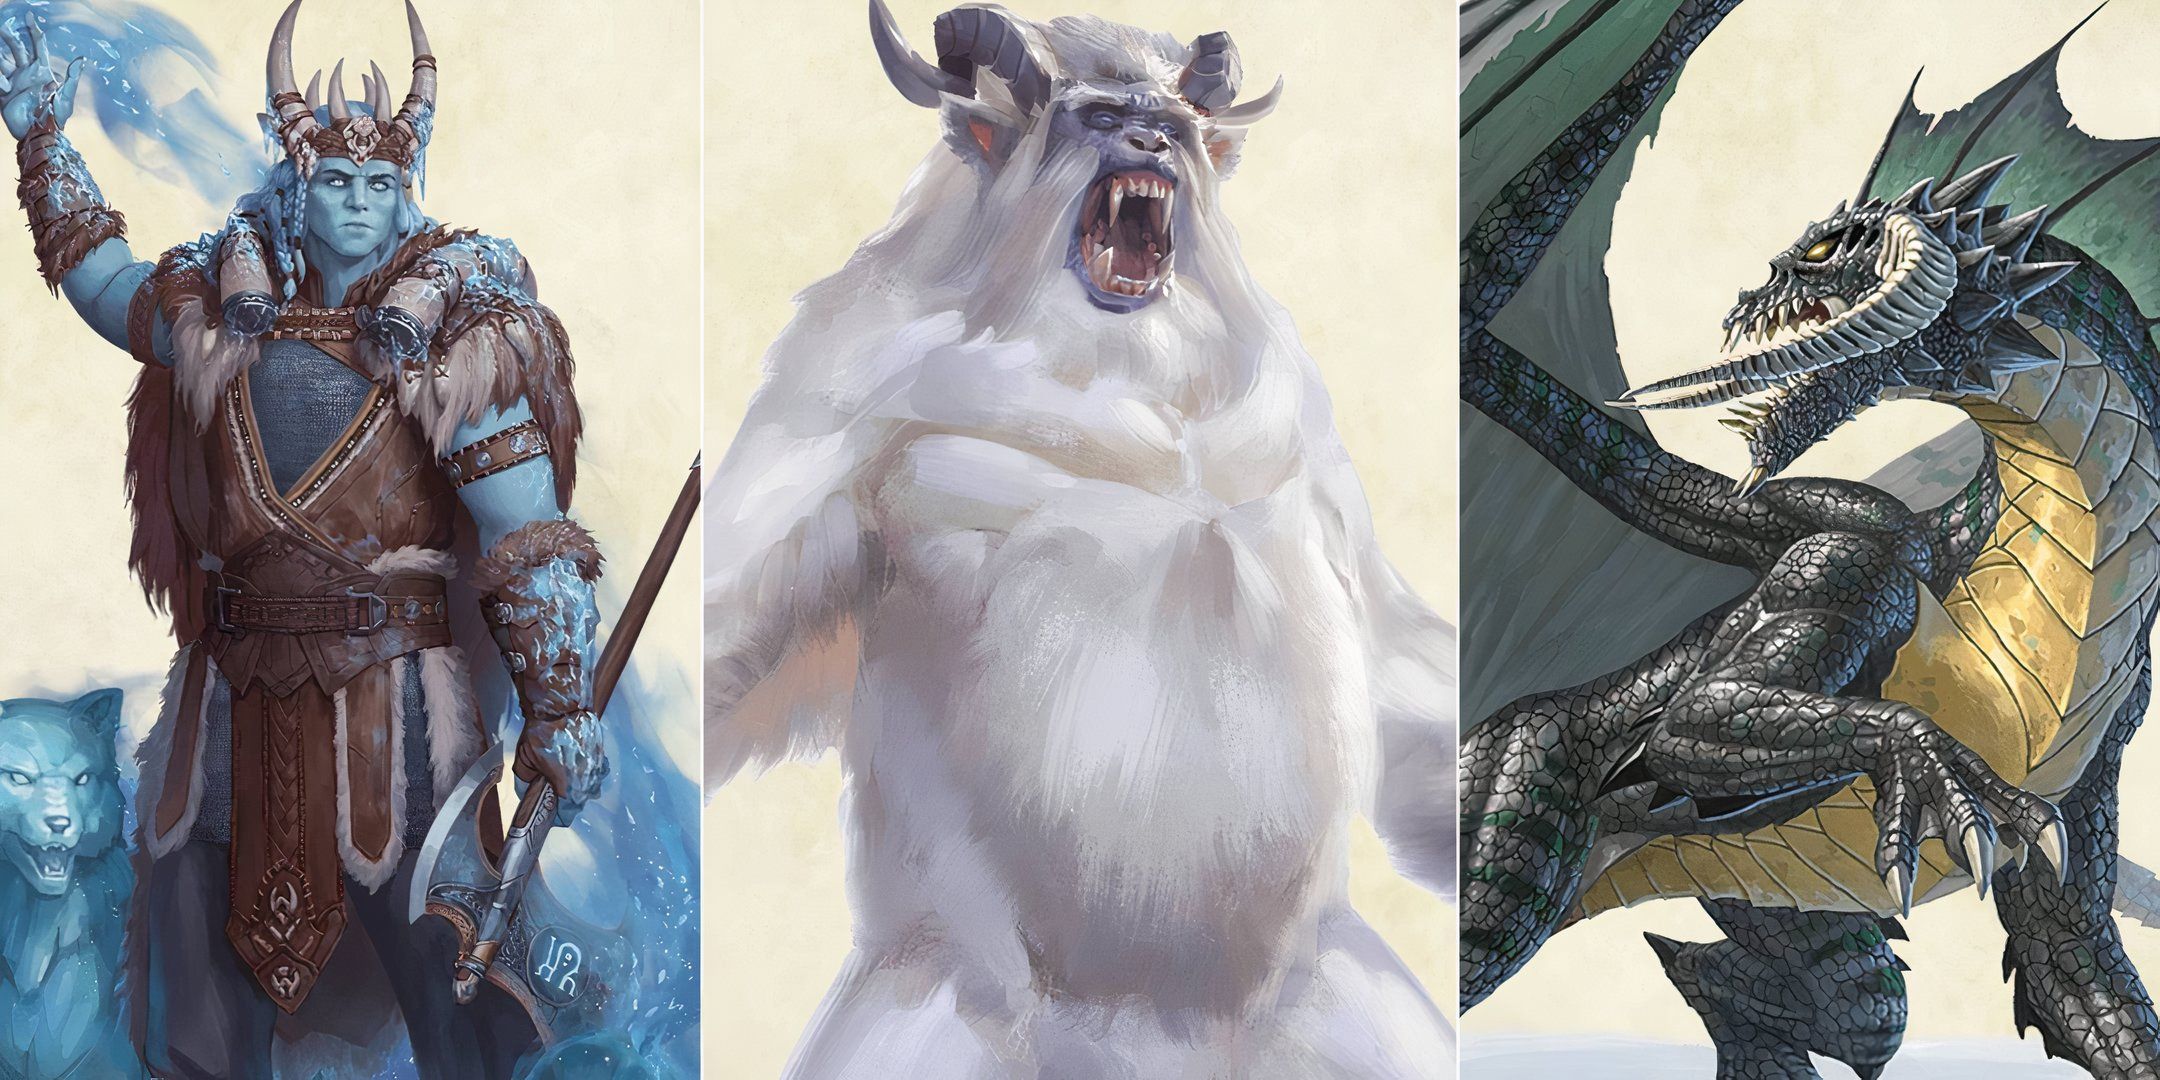 A collage of images featuring a giant blue humanoid, a roaring Yeti and a black dragon